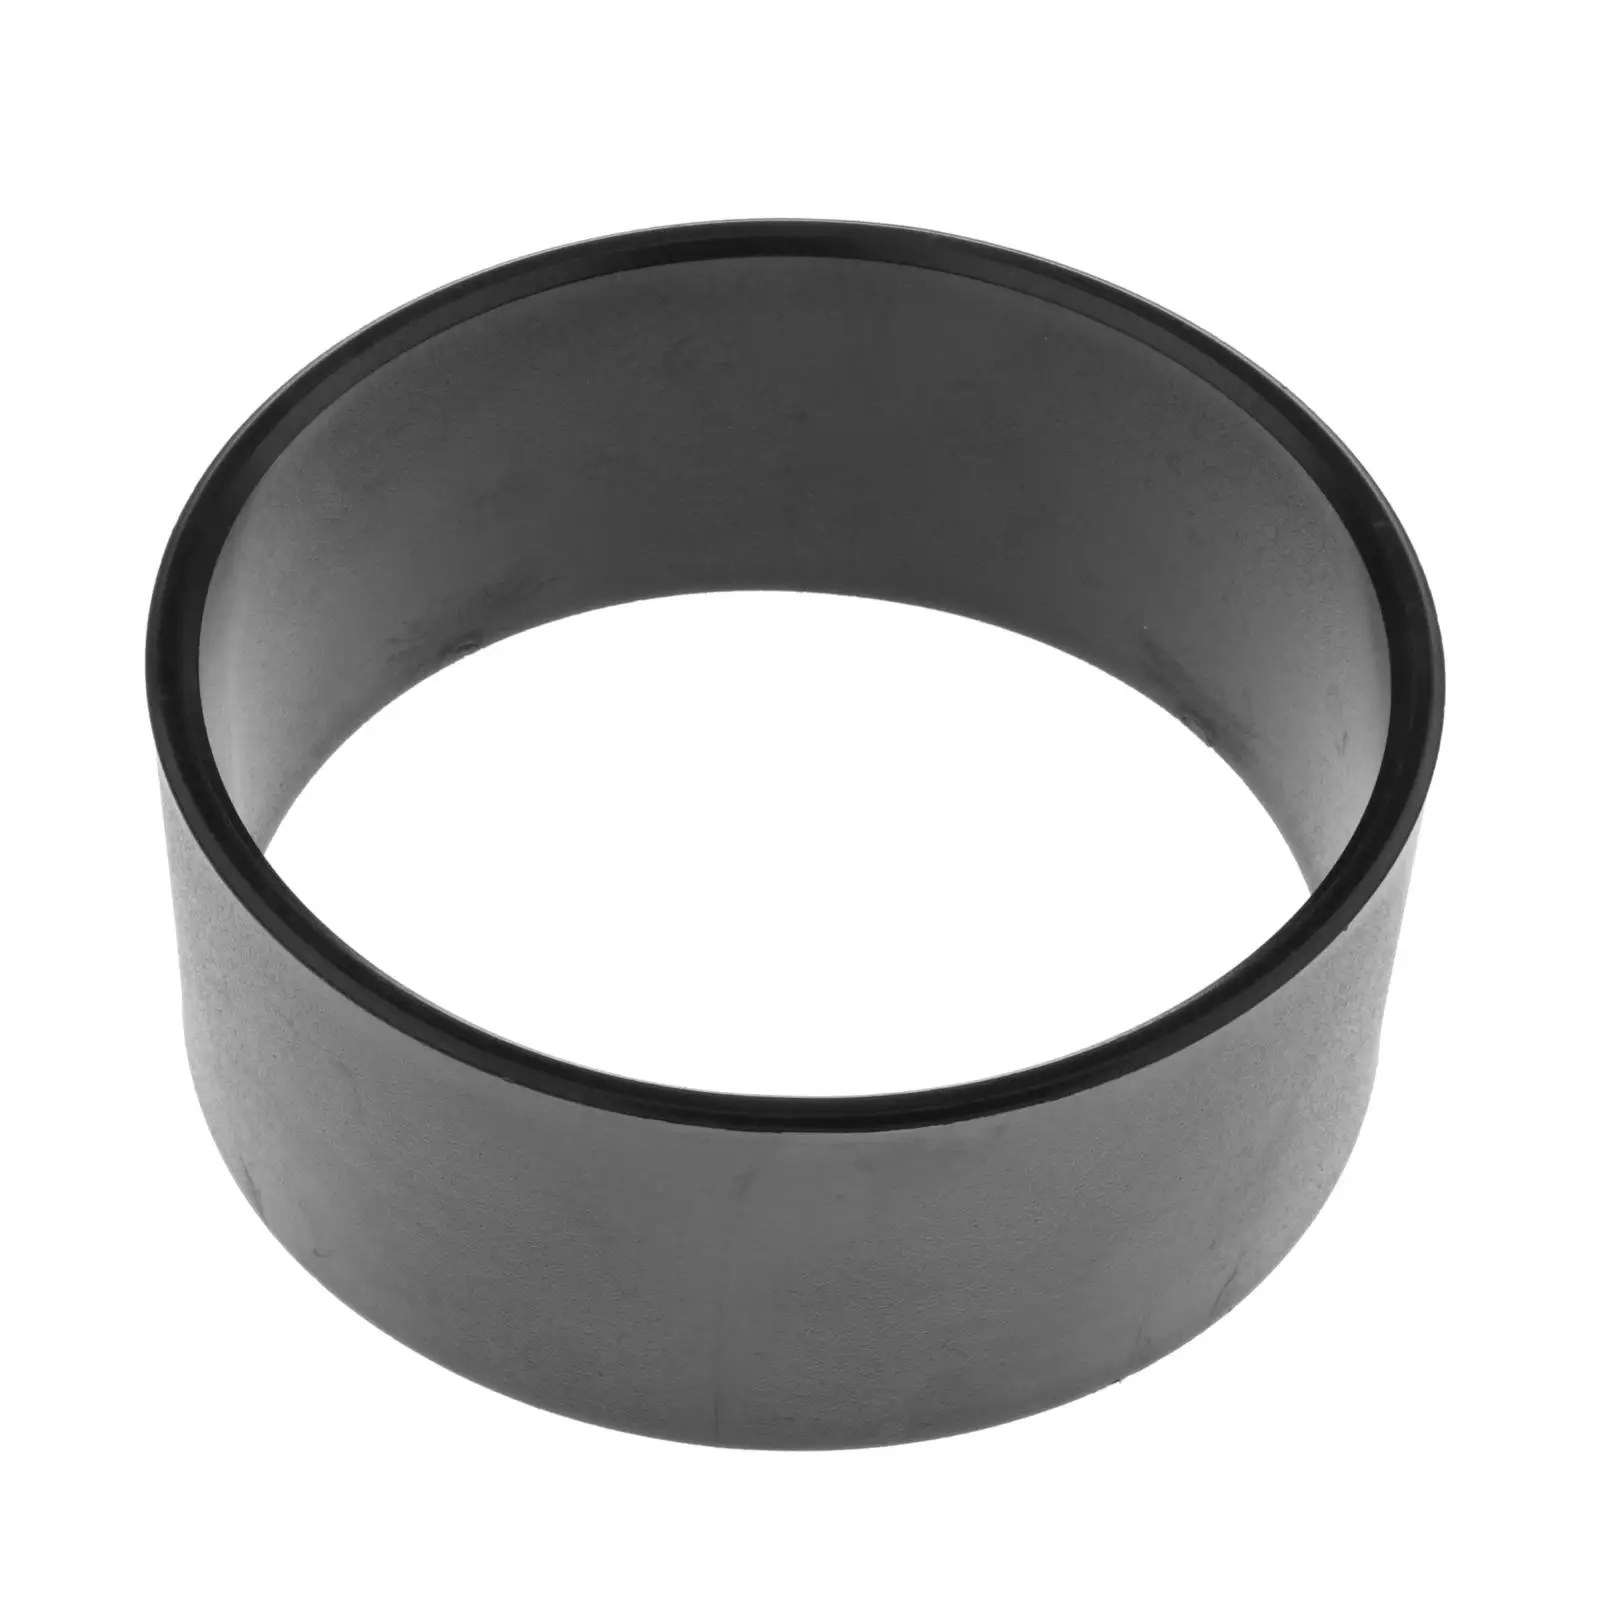 Wear Ring 155mm 271000653 for Sea Doo GSX GTX RX 3D GTI Accessories,Durable Material